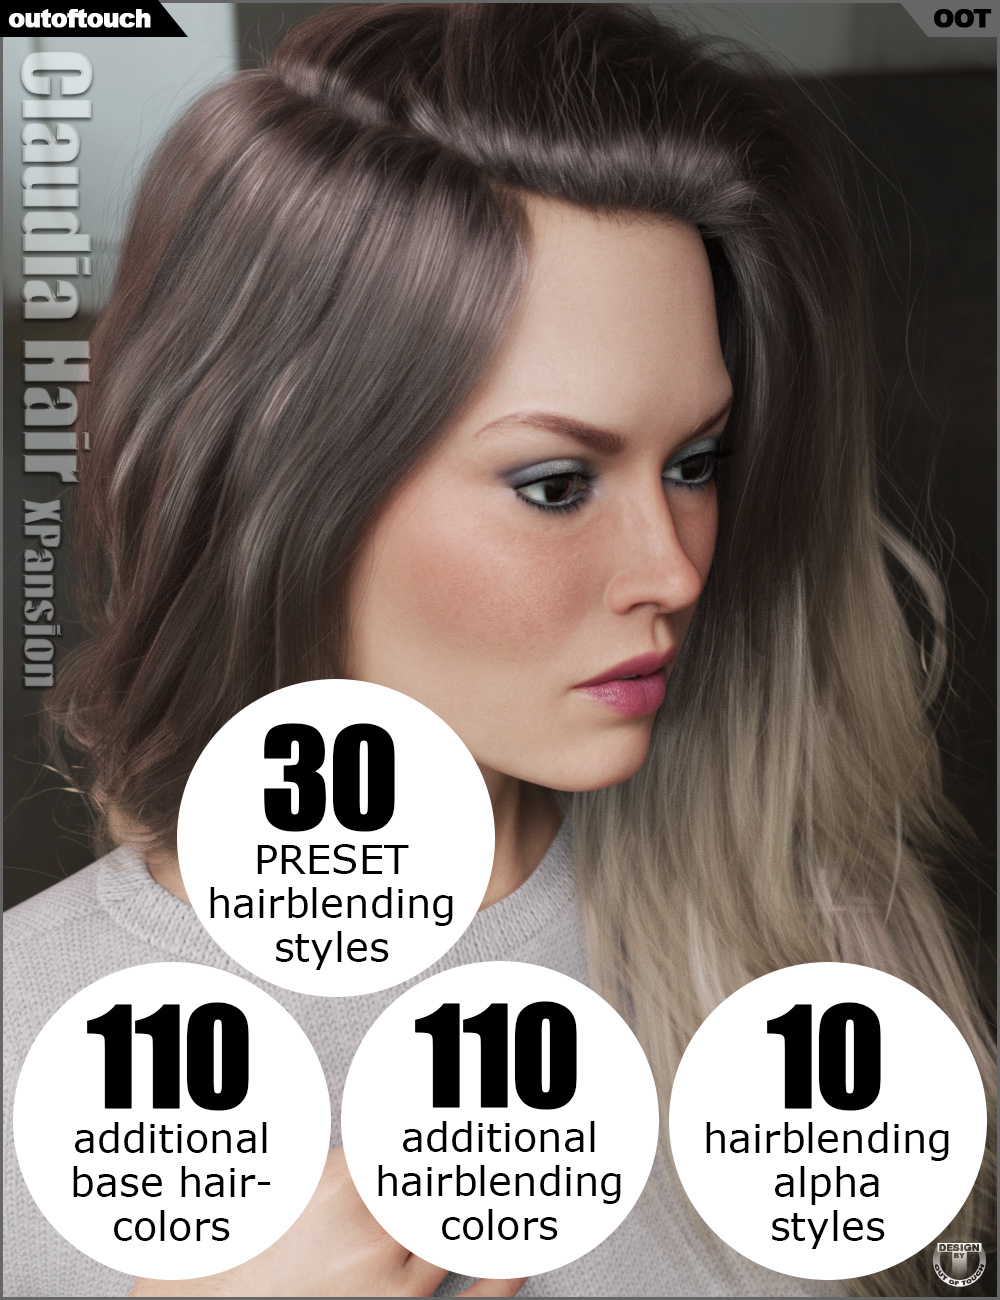 OOT Hairblending 2.0 Texture XPansion for Claudia Hair by: outoftouch, 3D Models by Daz 3D